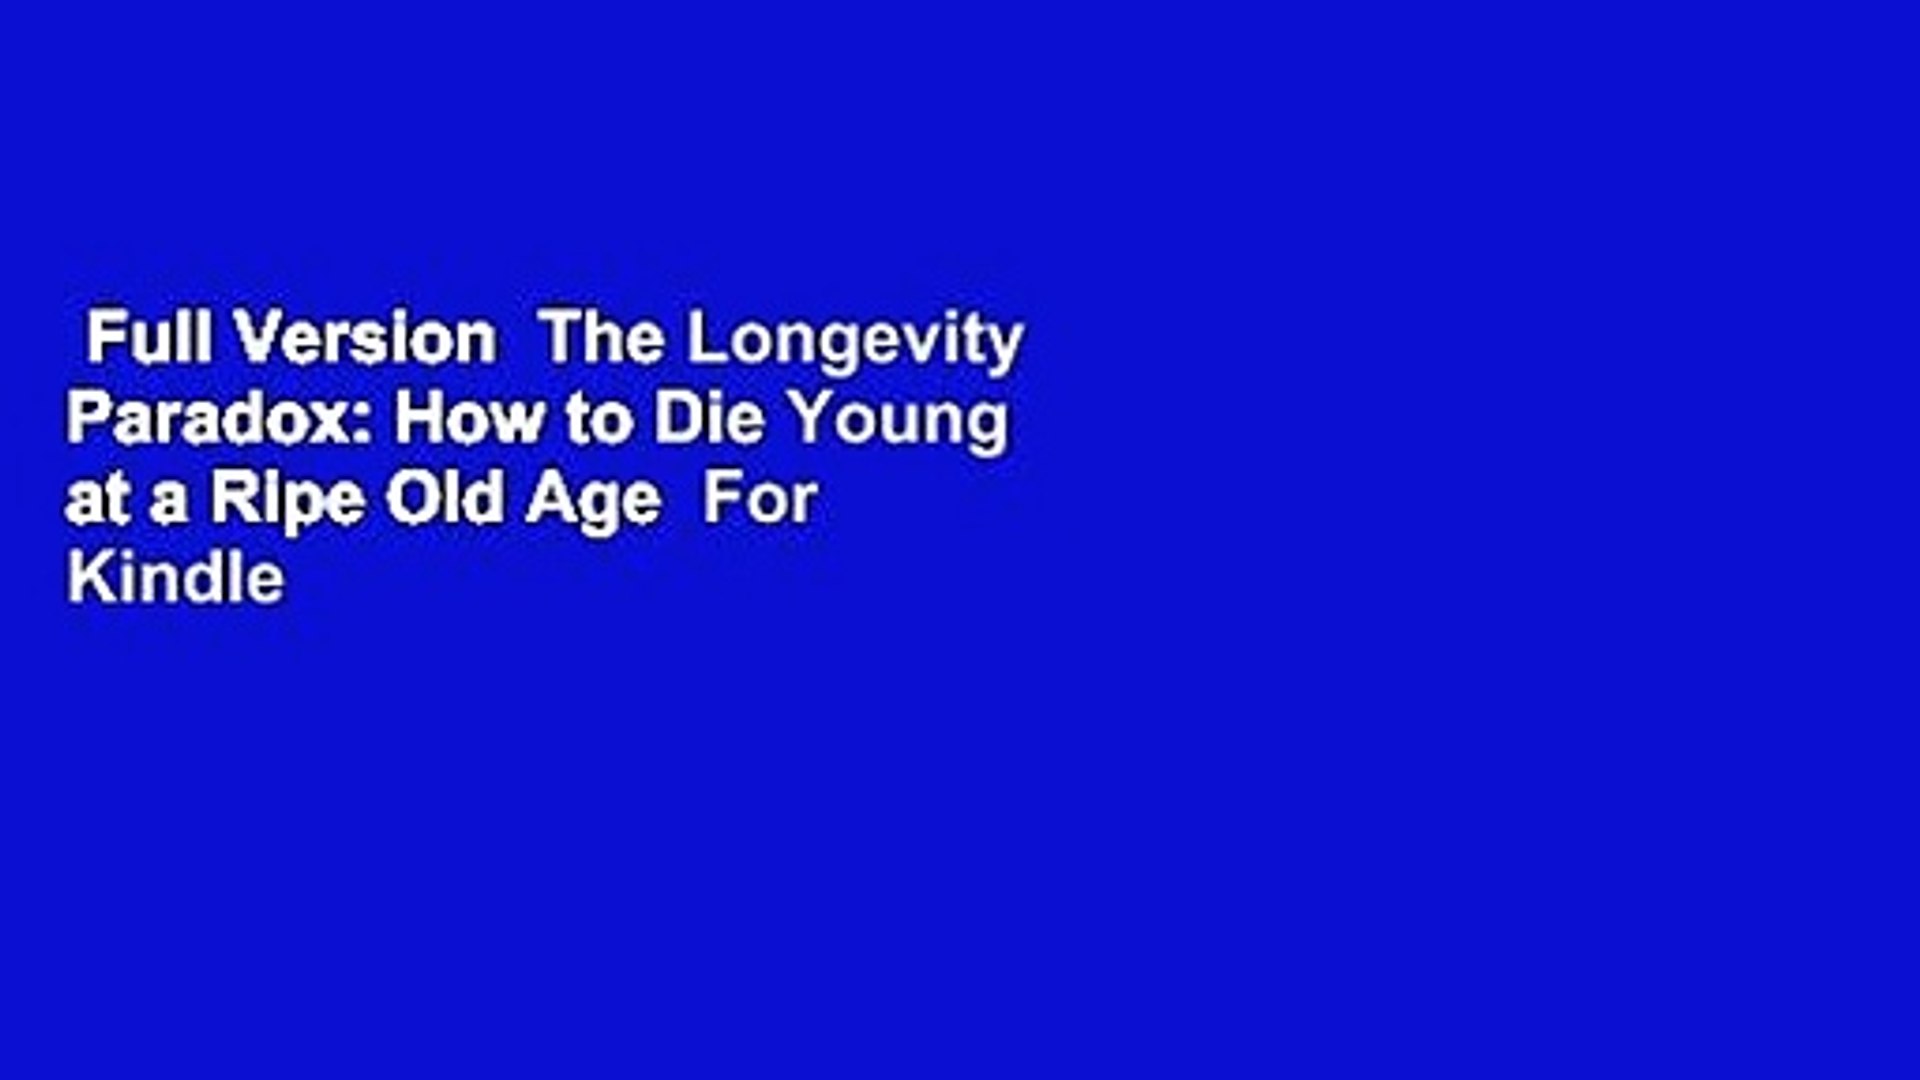 Full Version  The Longevity Paradox: How to Die Young at a Ripe Old Age  For Kindle